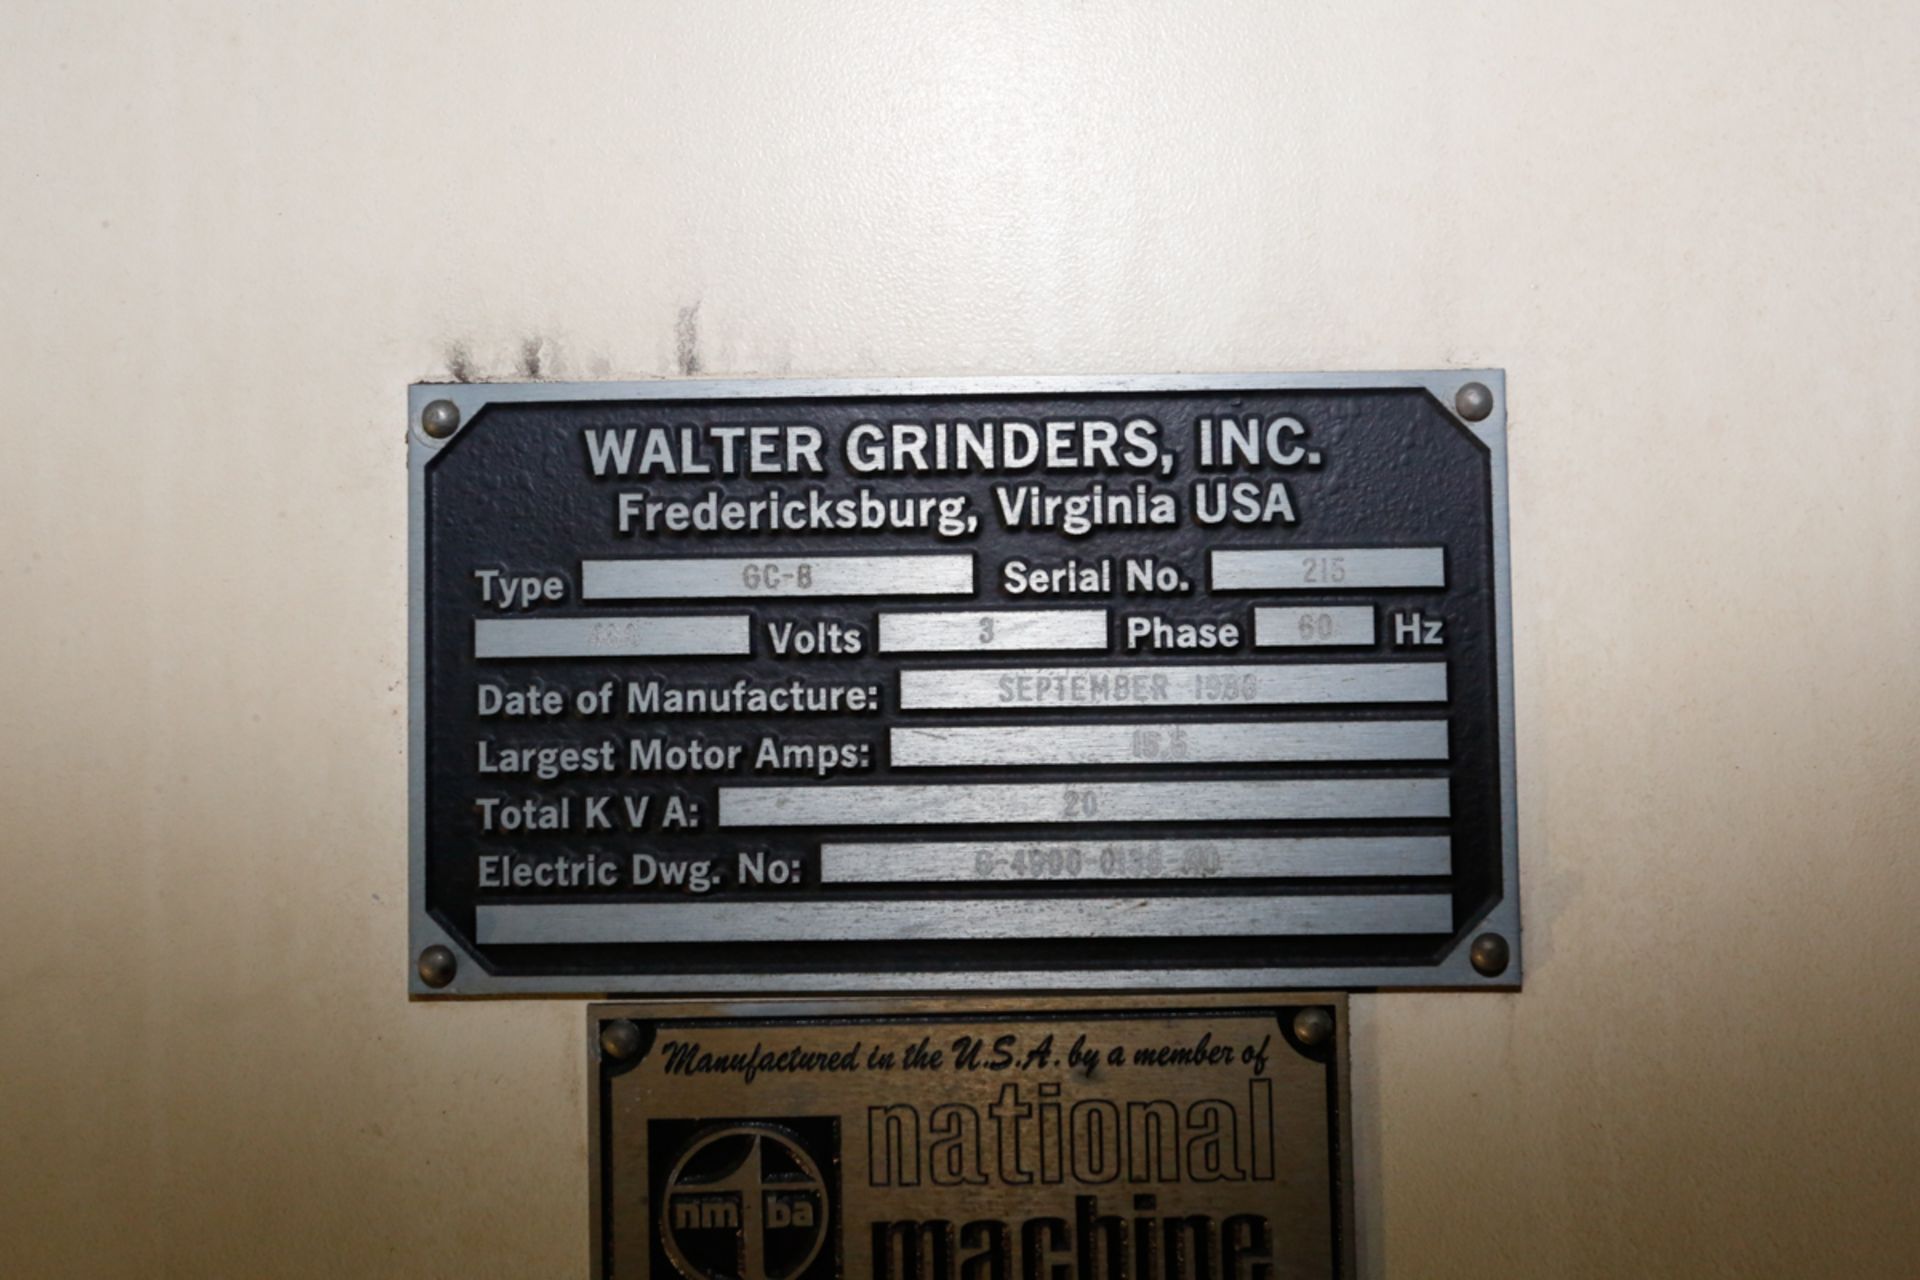 WALTER HELI-CENTER "GC-8" CNC TOOL GRINDER, 20 KVA, S/N: 0215, 1988 - LOCATED IN RICHMOND, QC - Image 5 of 5